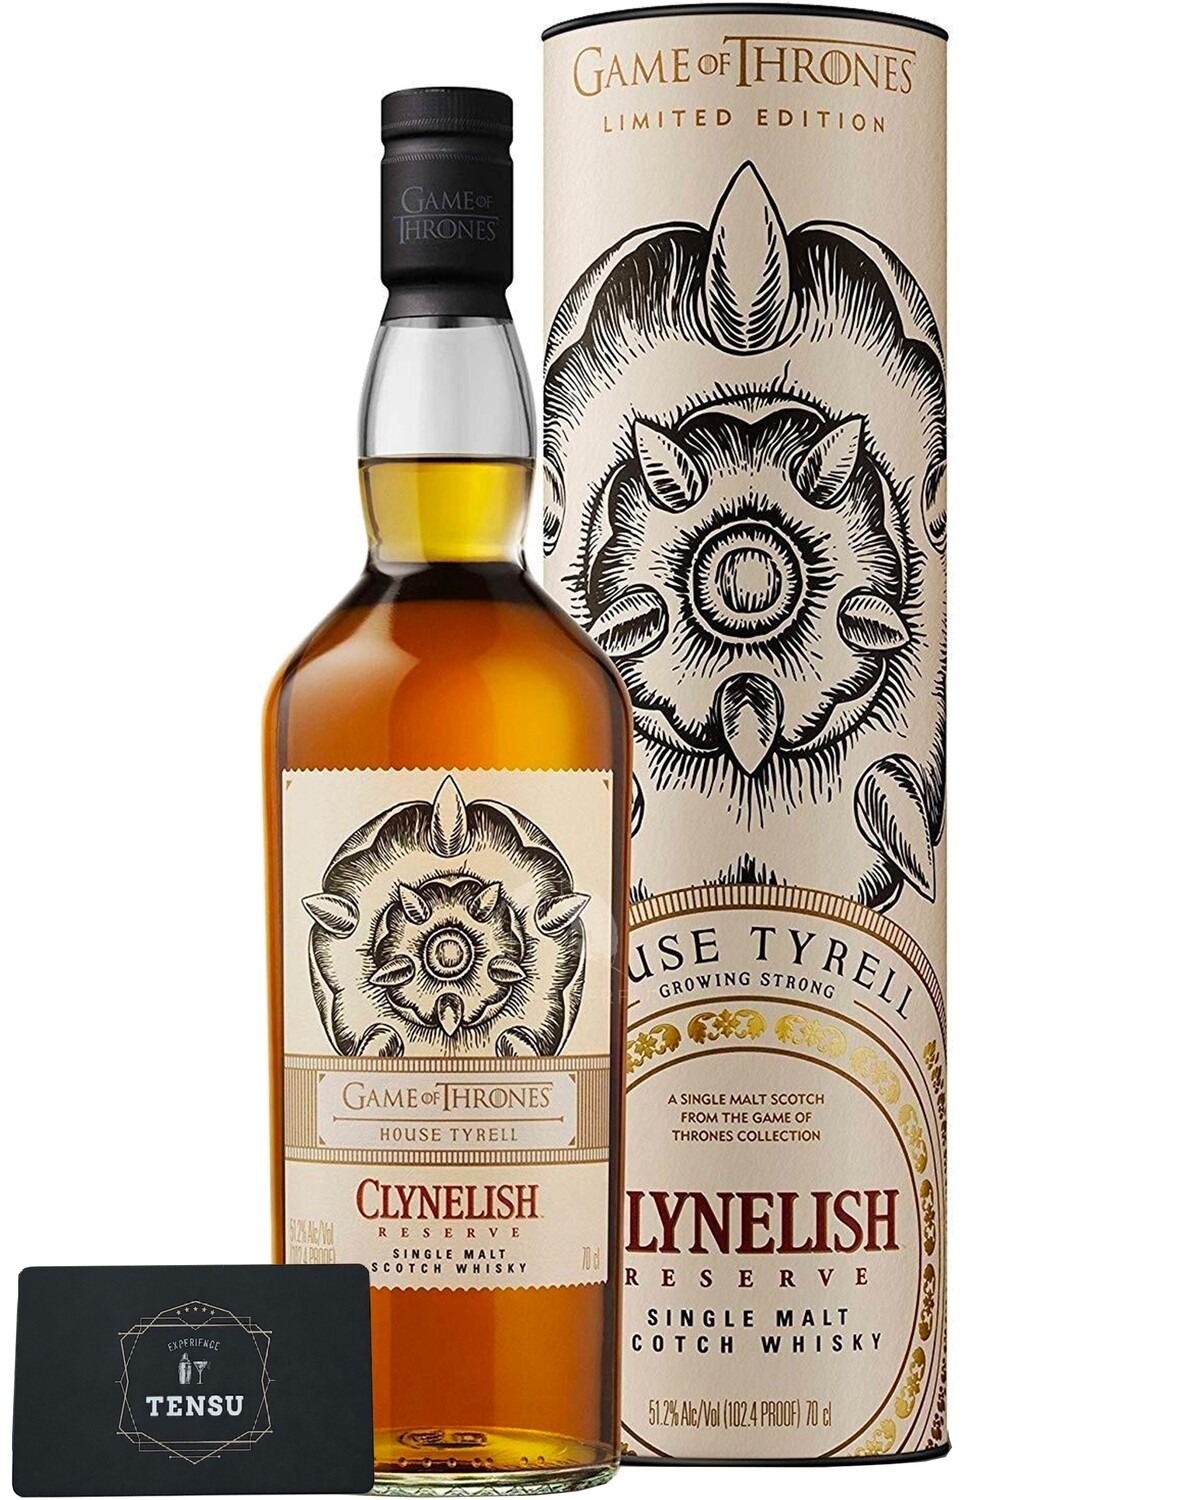 Clynelish Reserve - House Tyrell 51.2 "Game Of Thrones"